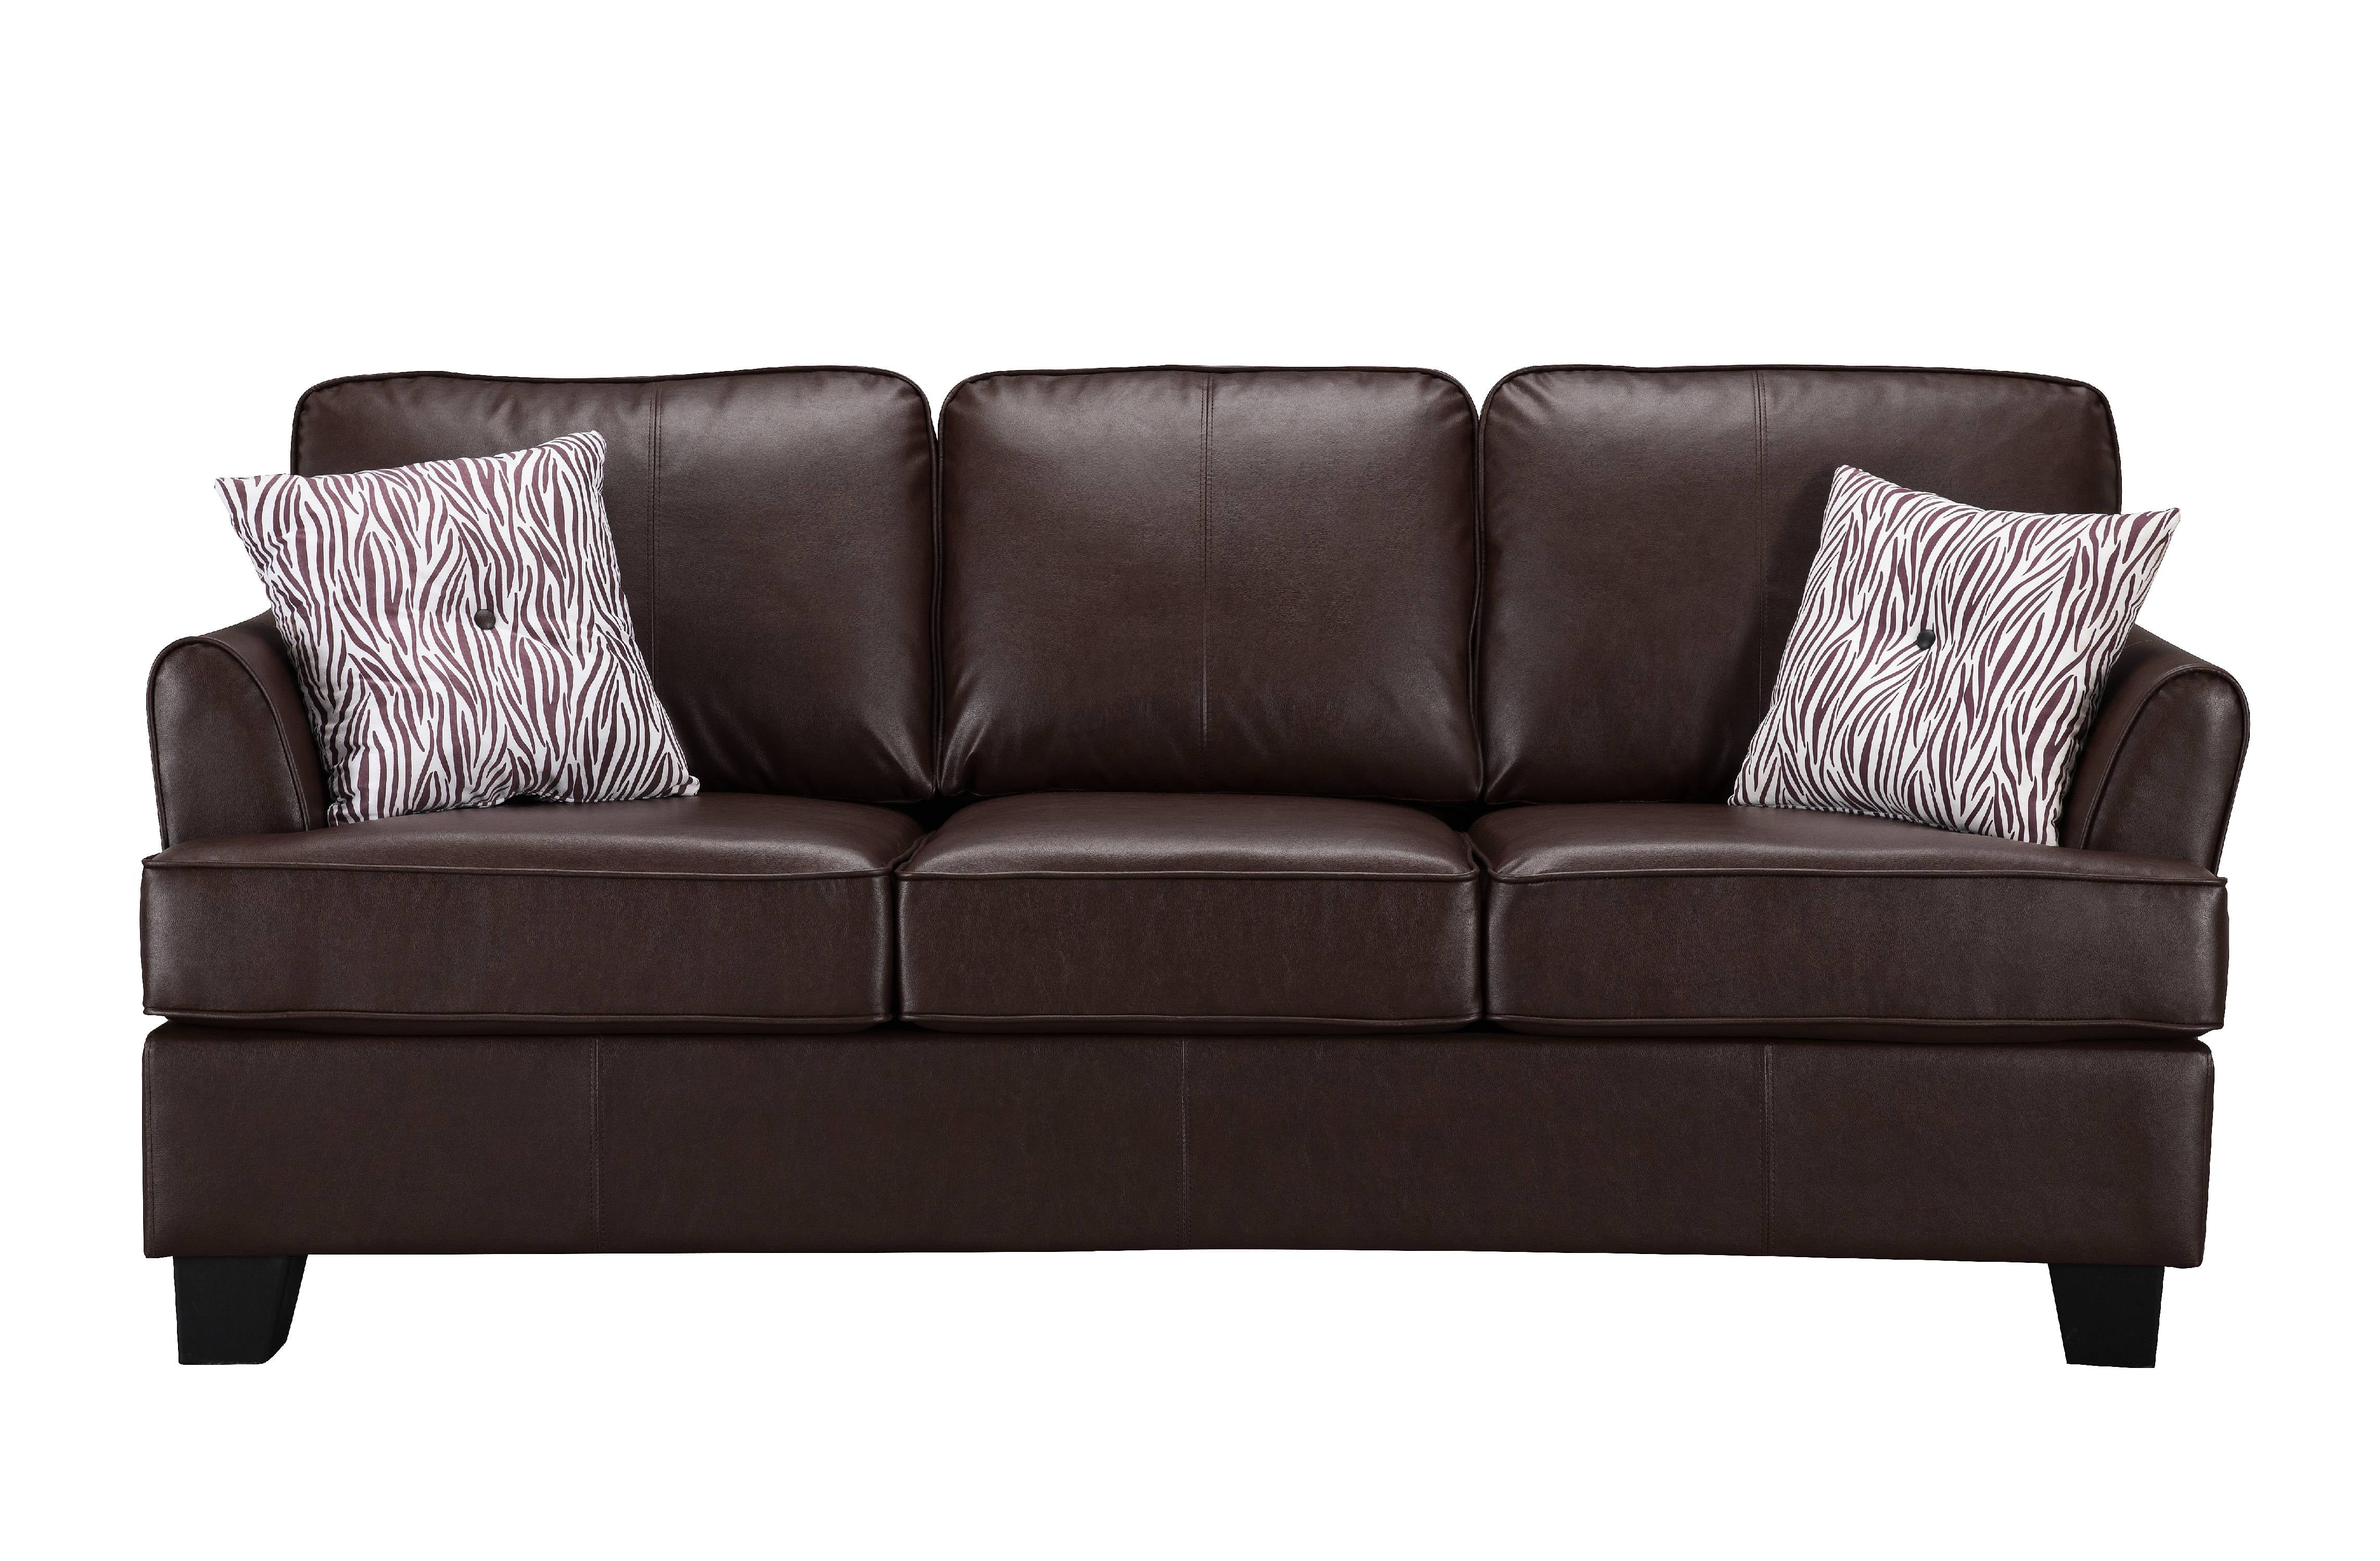 sofa sleeper queen size in leather